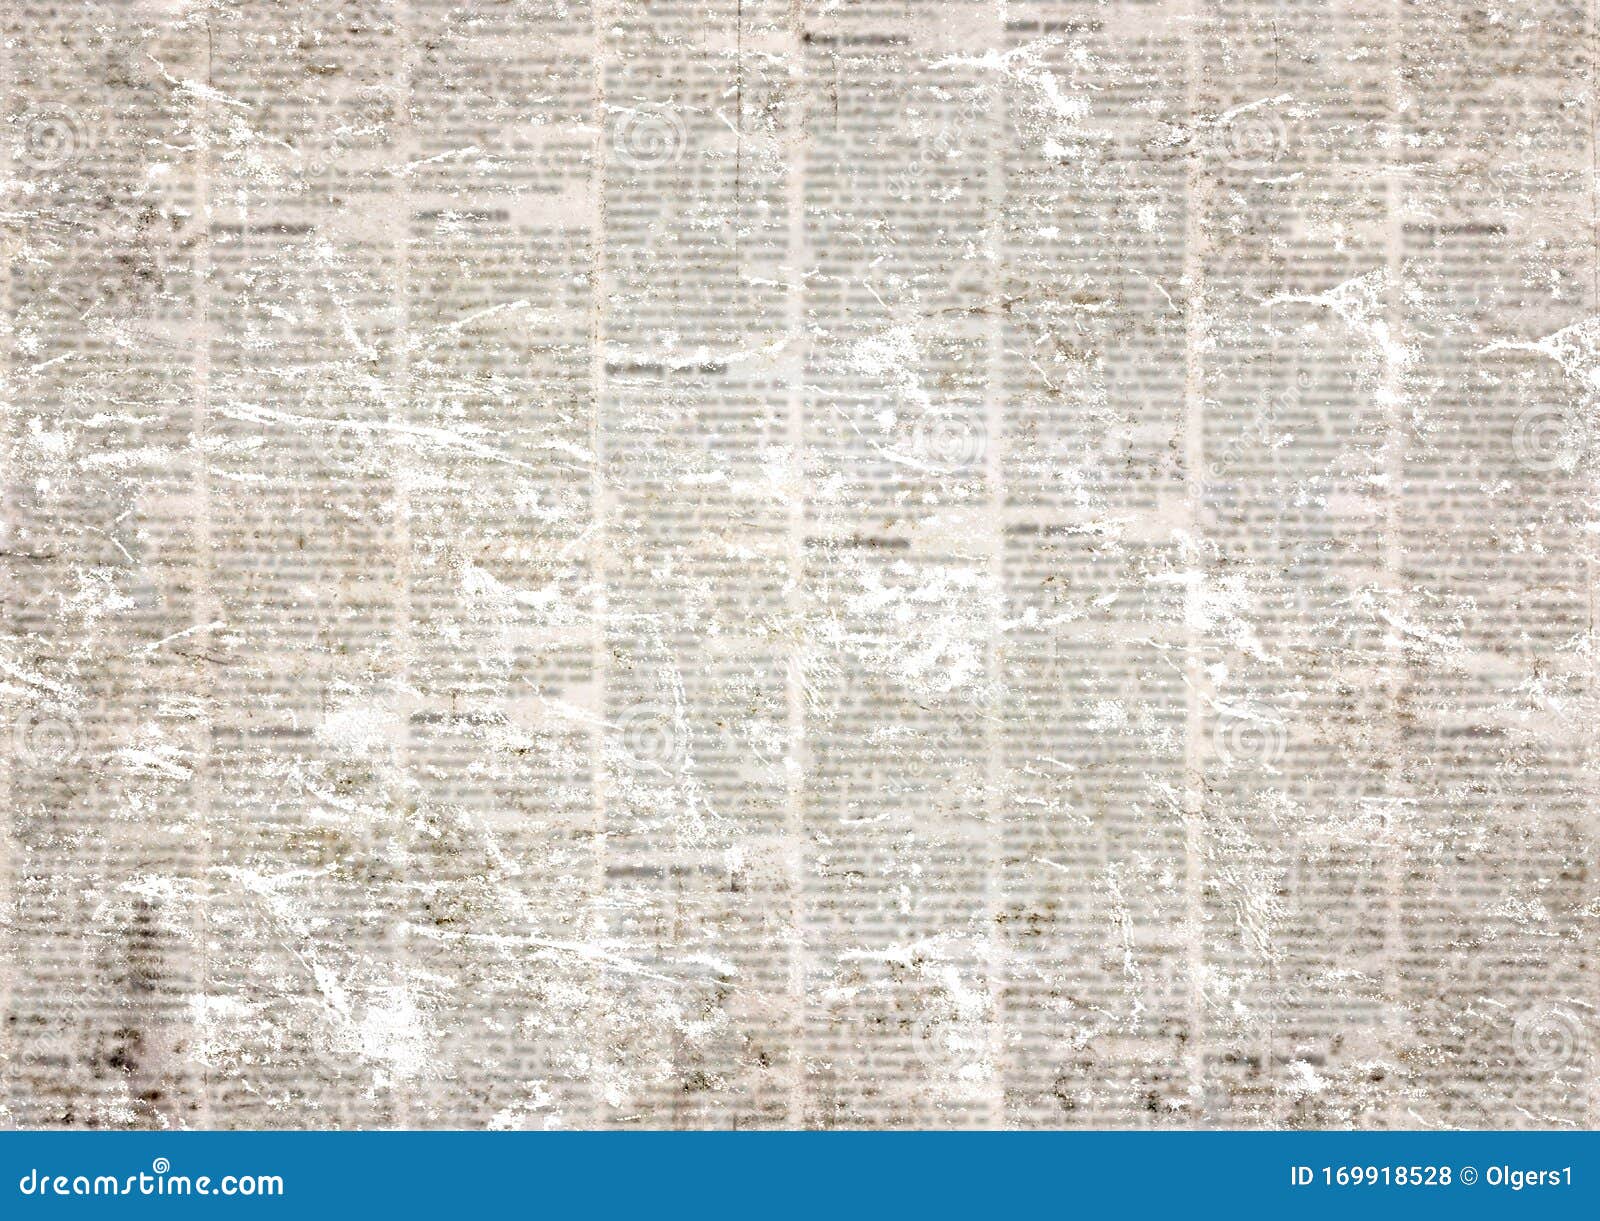 Old Vintage Grunge Newspaper Paper Texture Background Stock Photo Image Of Dirty Print